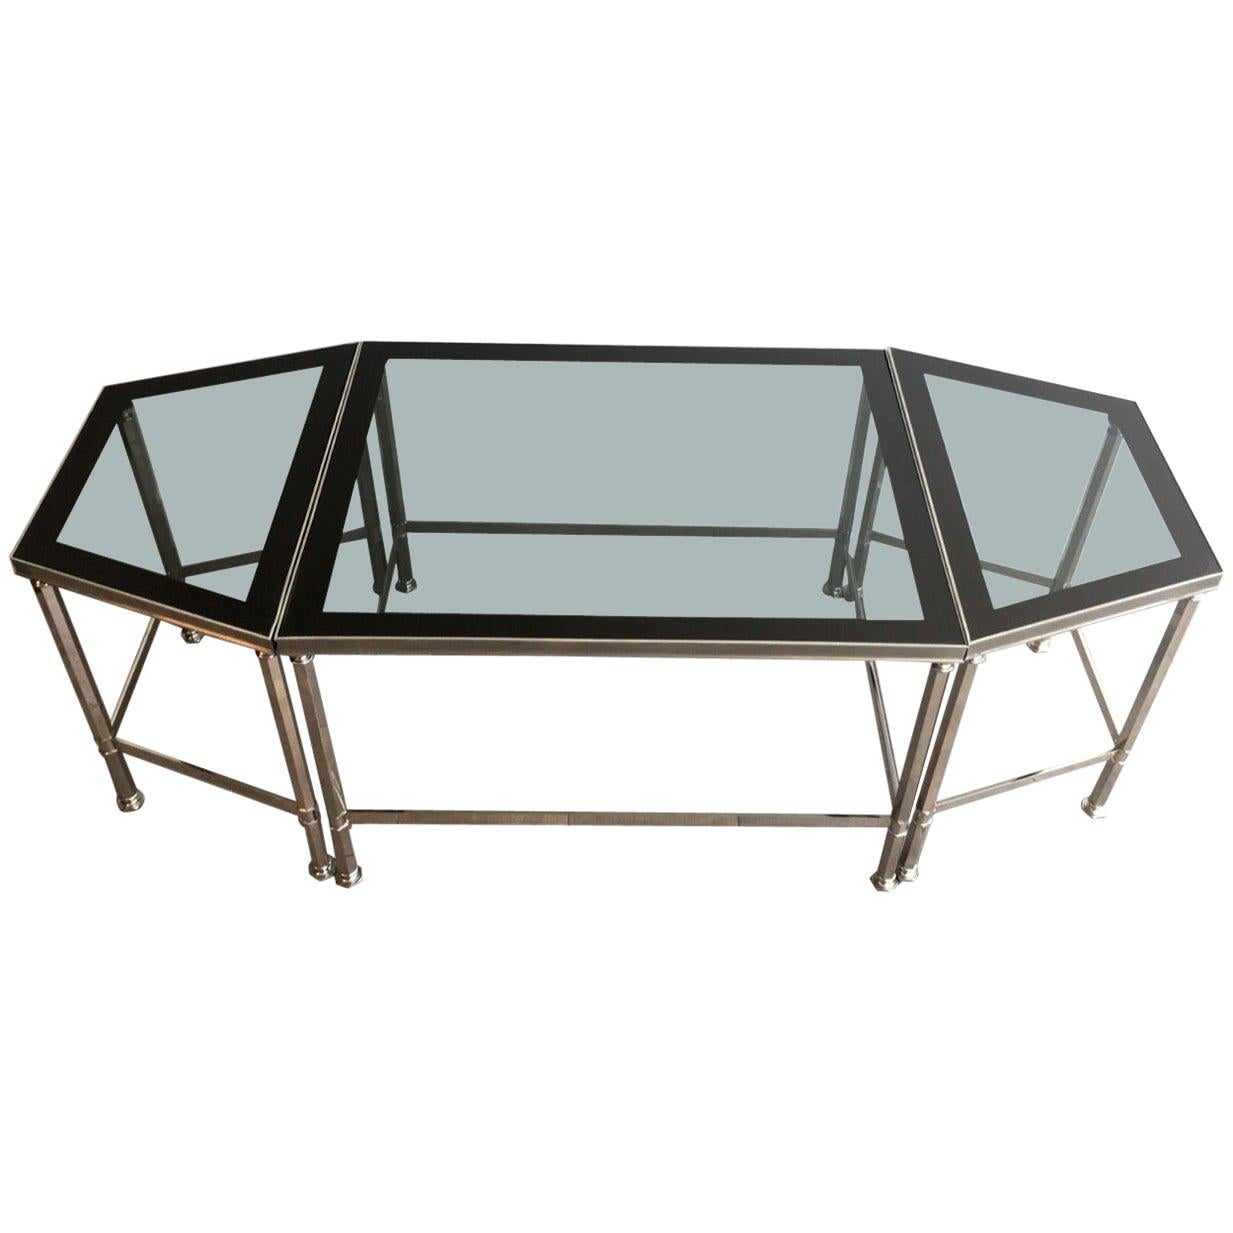 Rare Nickeled Tripartie Coffee Table with Glass Tops Lacquered All Around For Sale